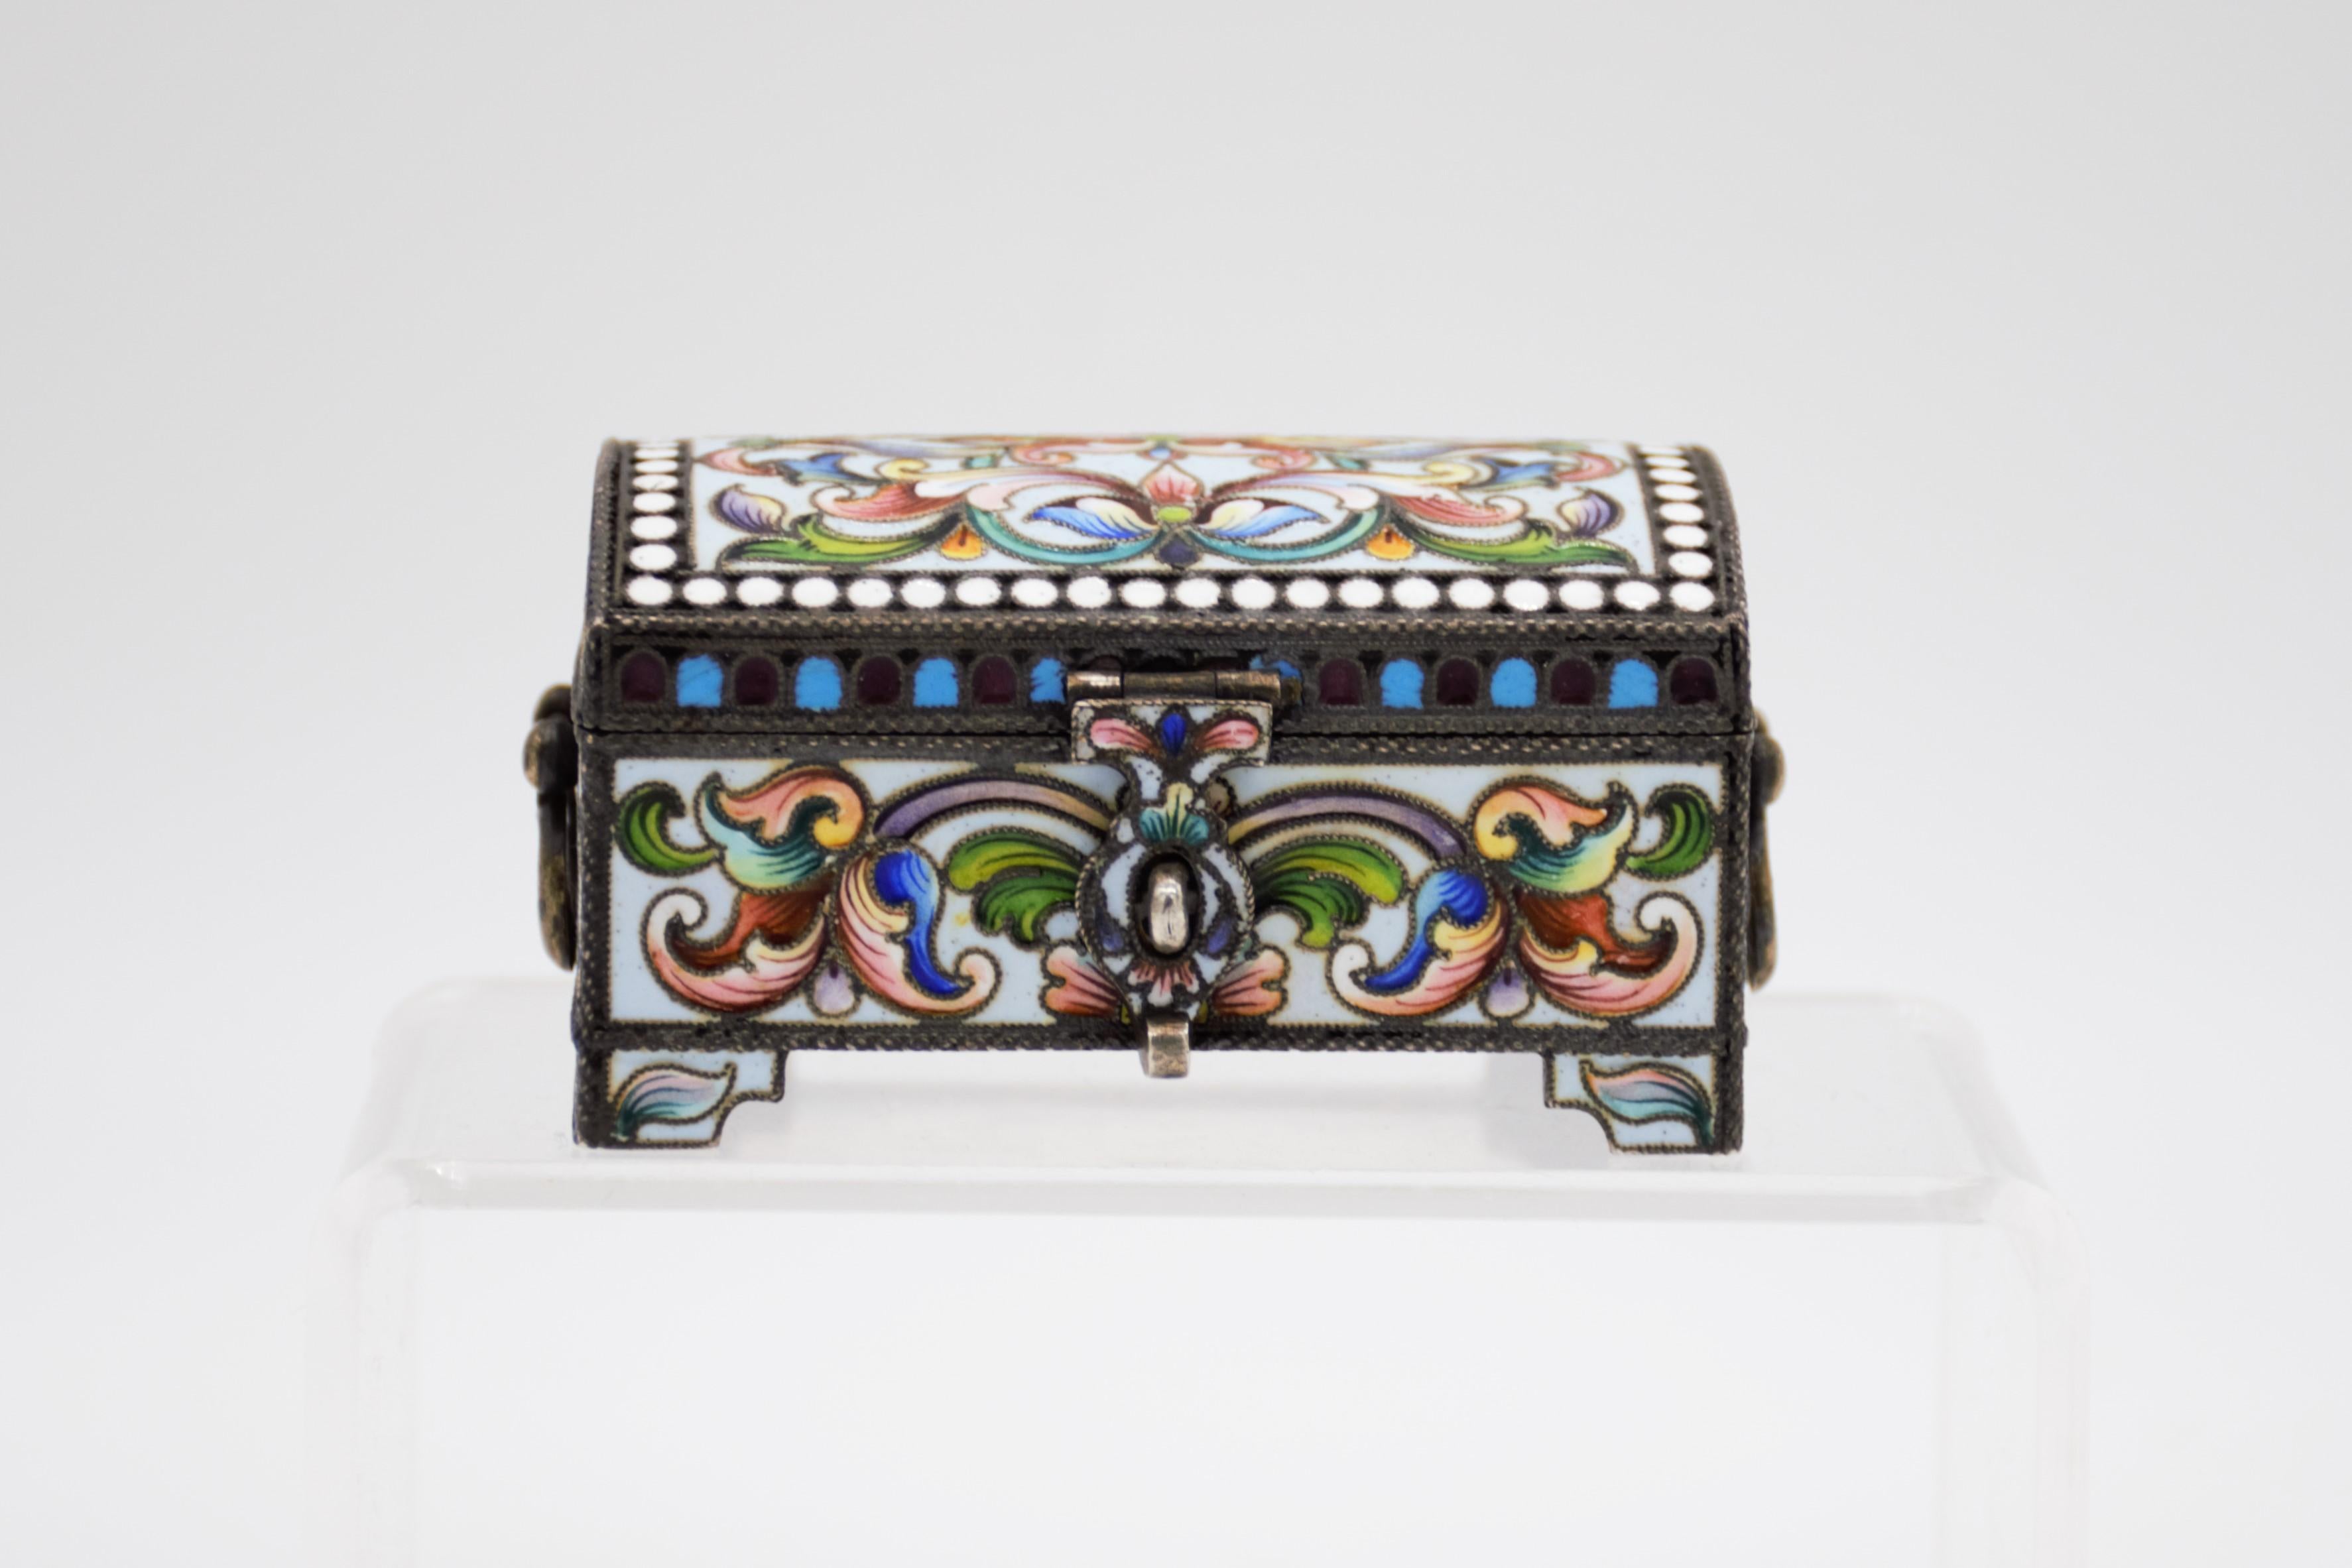 This treasure chest shaped box is luxuriously decorated and dates from the final decades Of the Imperial period. The box was produced by the workshop of Maria Semonova and Is formed of 875 grade silver with silver-gilt utilised throughout. the box